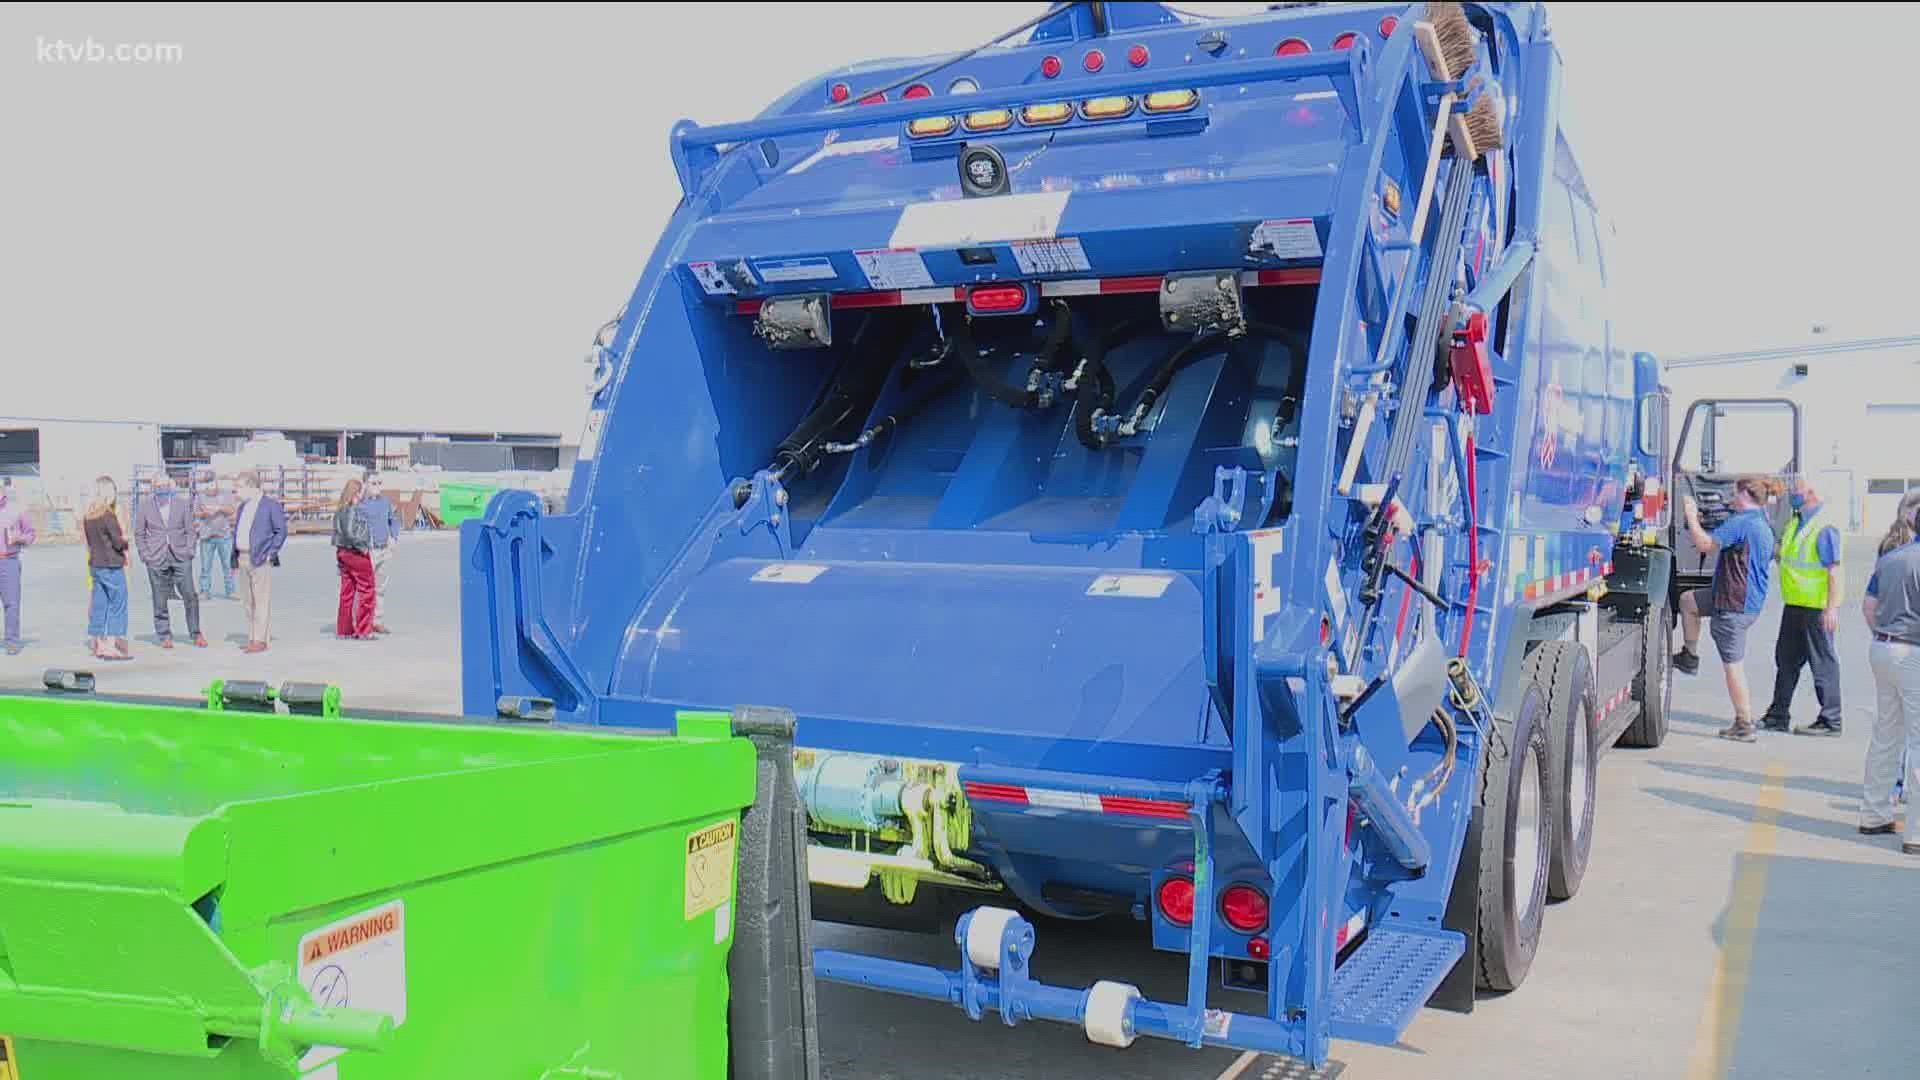 The truck can serve up to 120 containers per day and collect seven tons of material before it needs to dump it off local recycling centers.